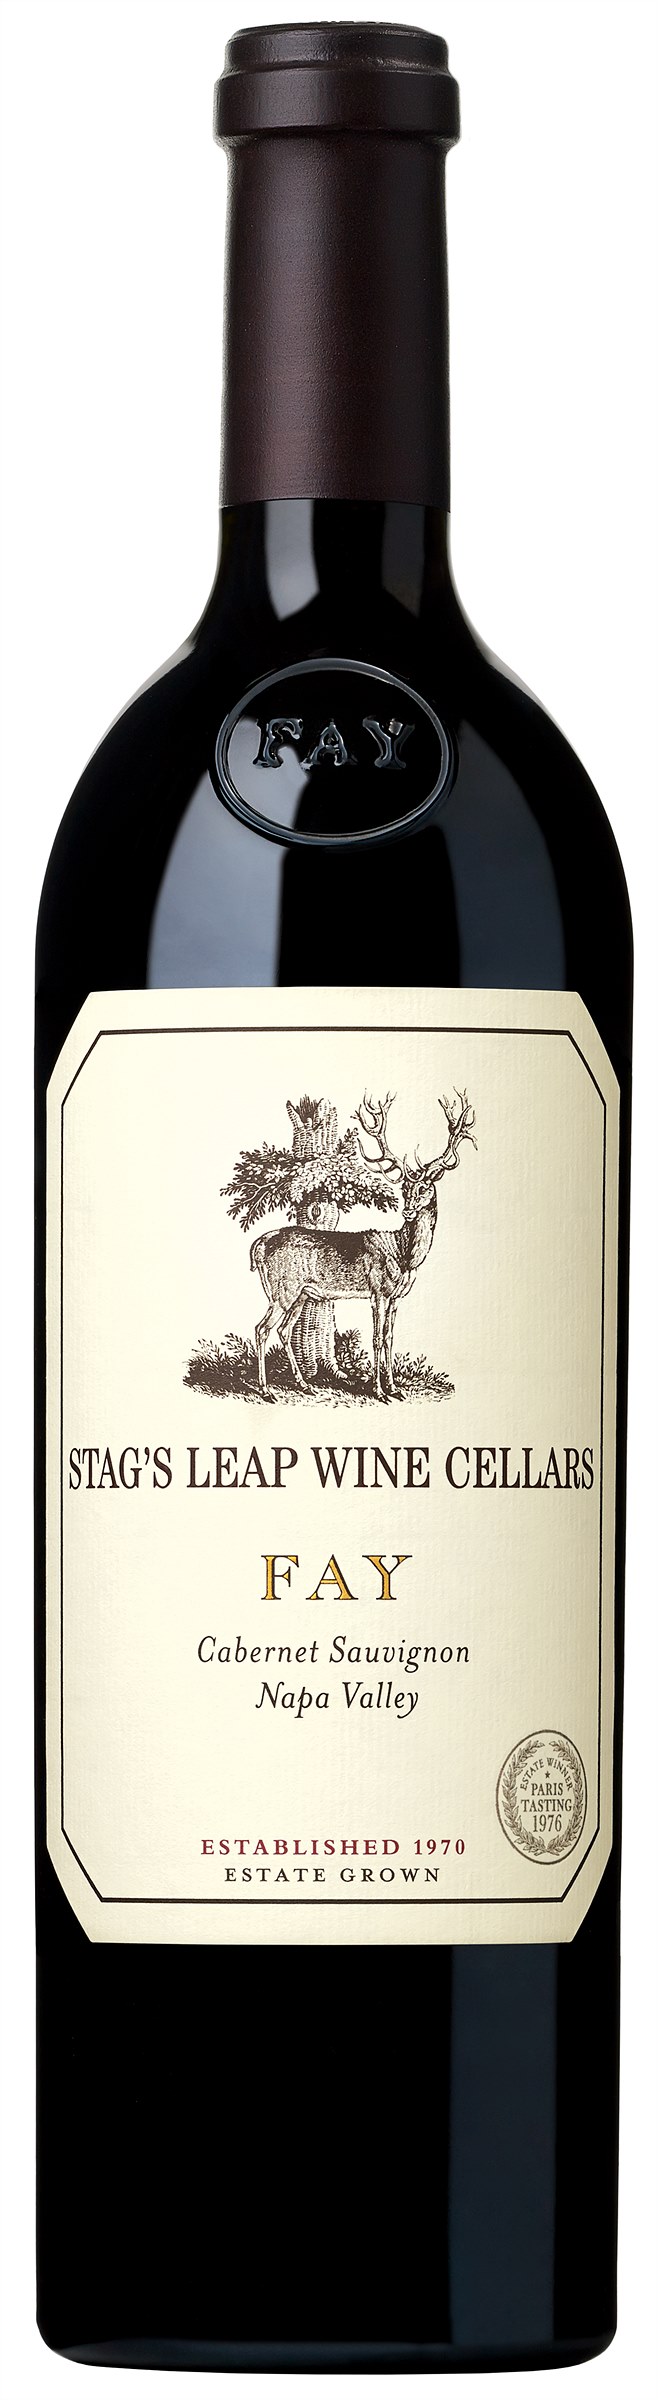 StagÔs Leap Wine Cellars_FAY_high_res